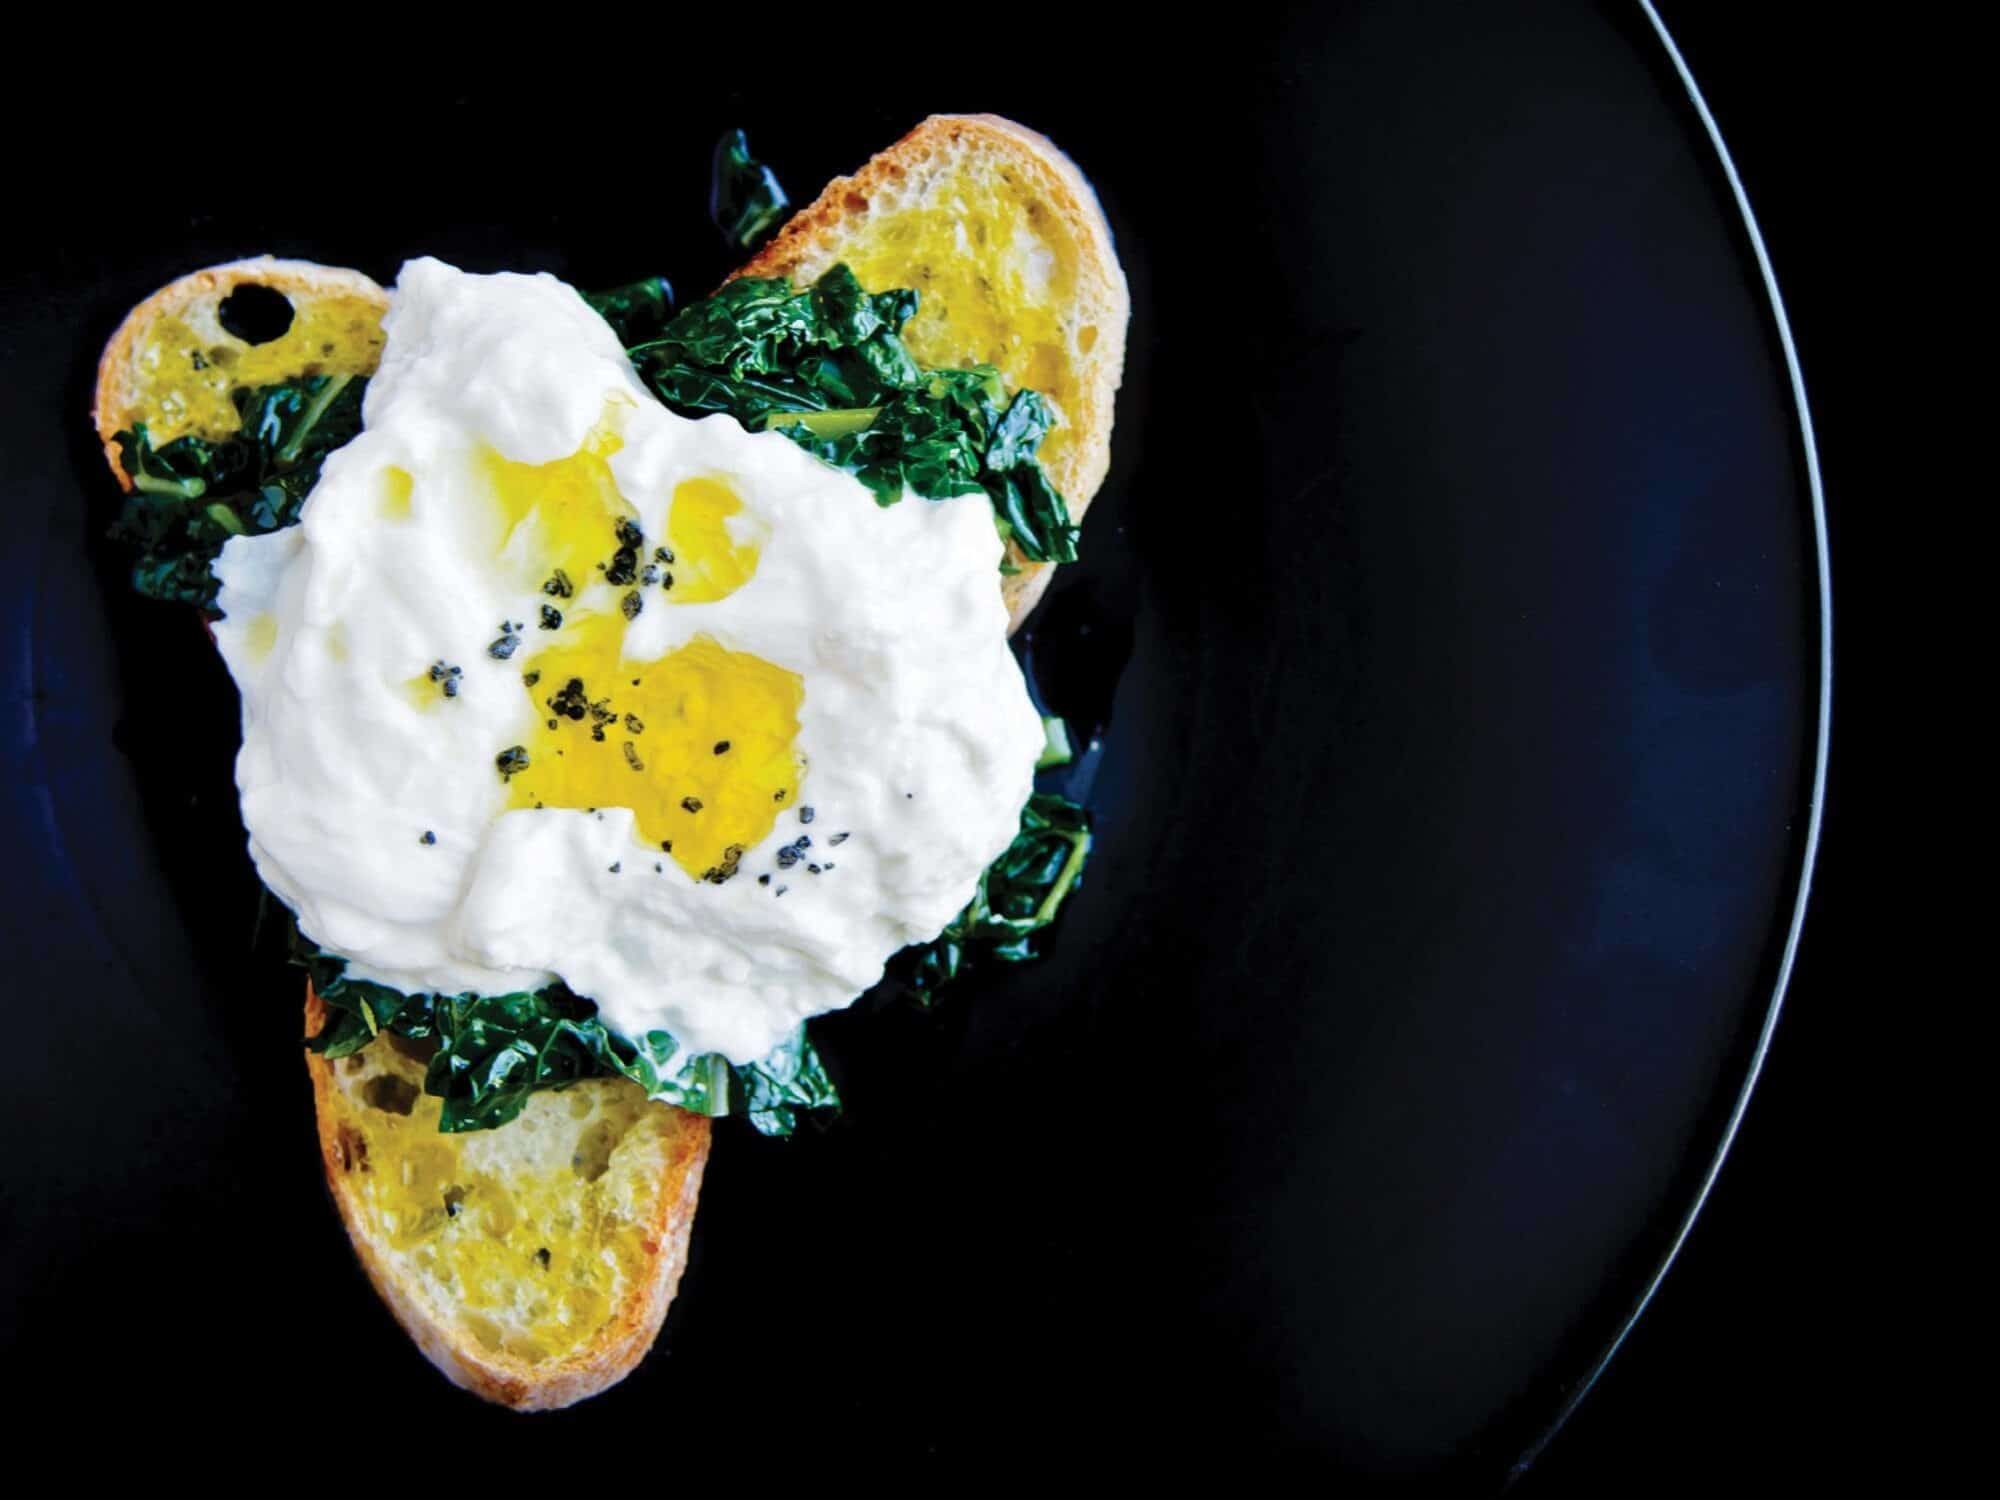 Simple Burrata dish with cheese on crunchy bread and olive oil